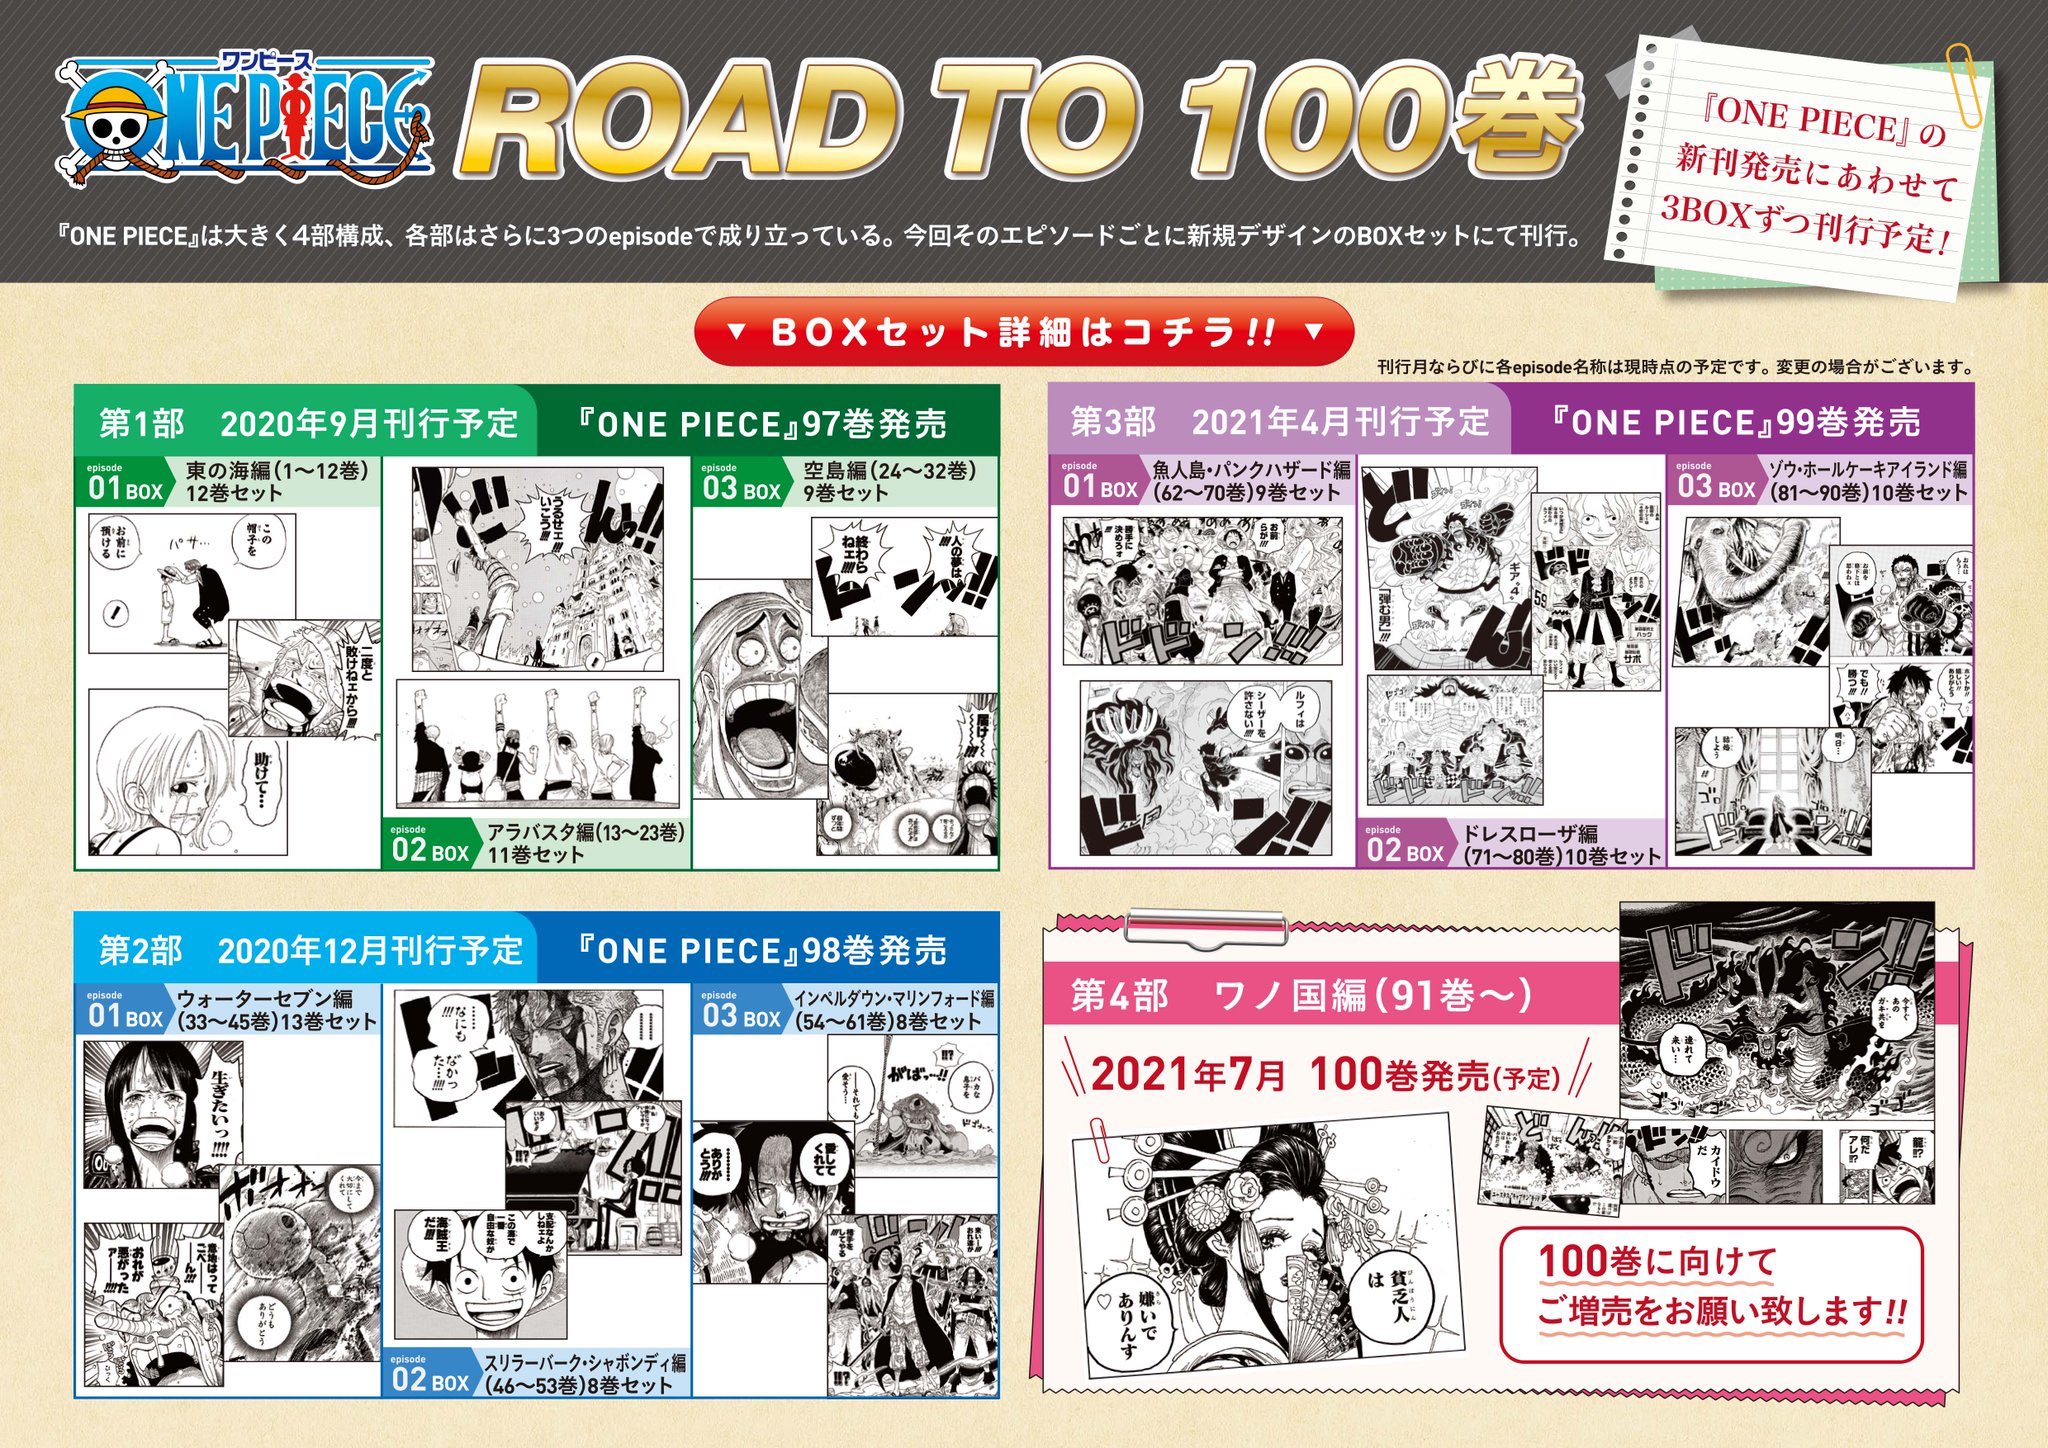 Manga Mogura One Piece Vol 98 Will Be Out In December Vol 99 In April 21 And Vol 100 In July 21 T Co Cmji3kovdd Twitter